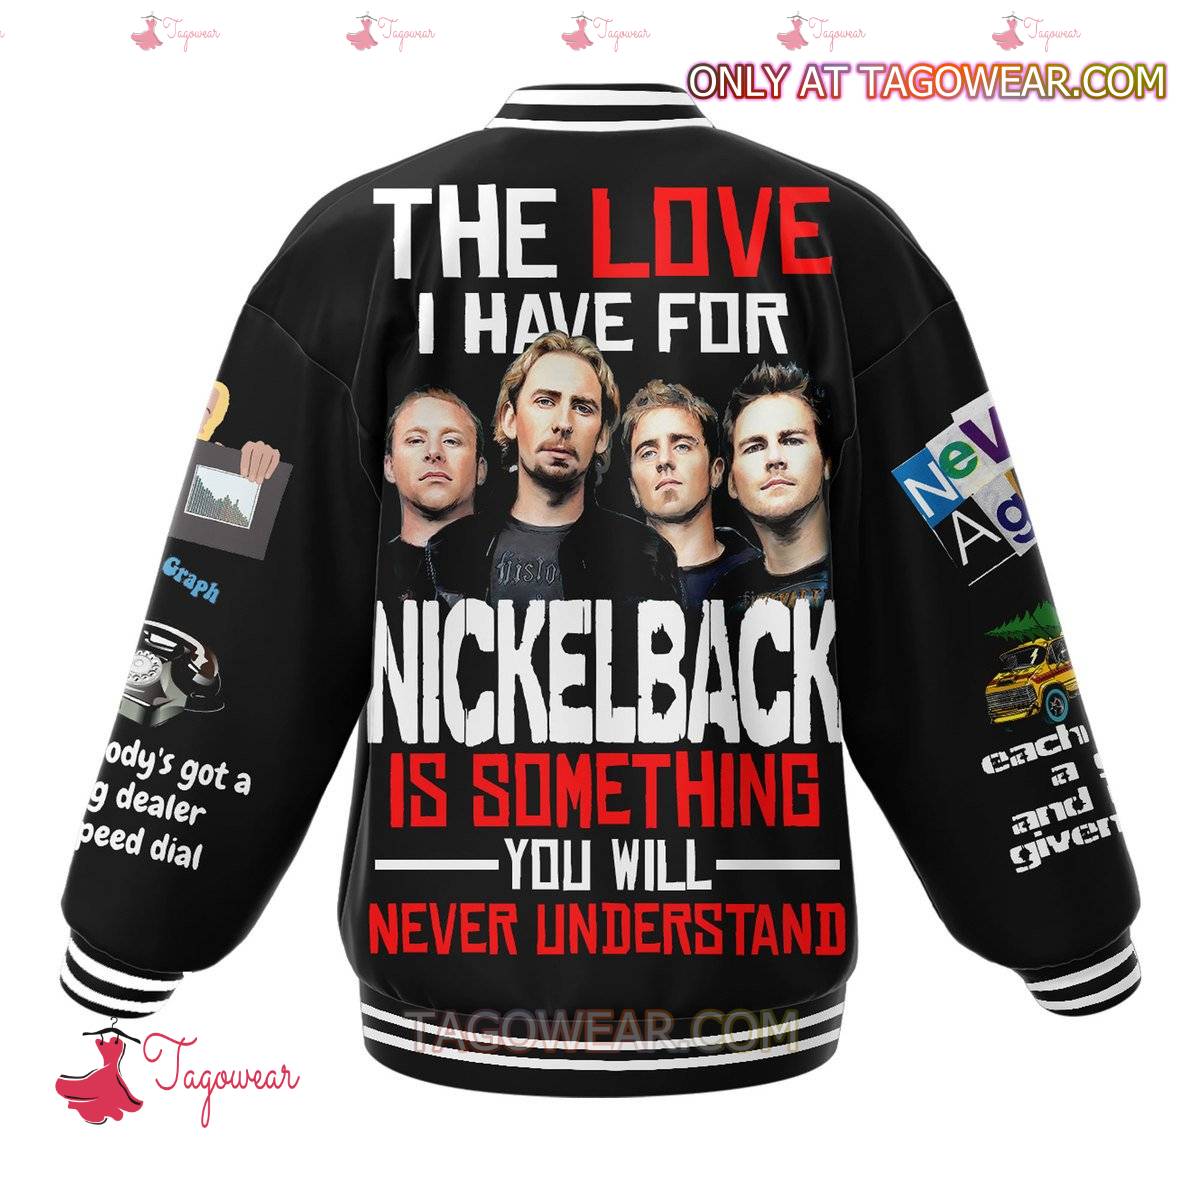 The Love I Have For Nickelback Is Something You Will Never Understand Baseball Jacket a